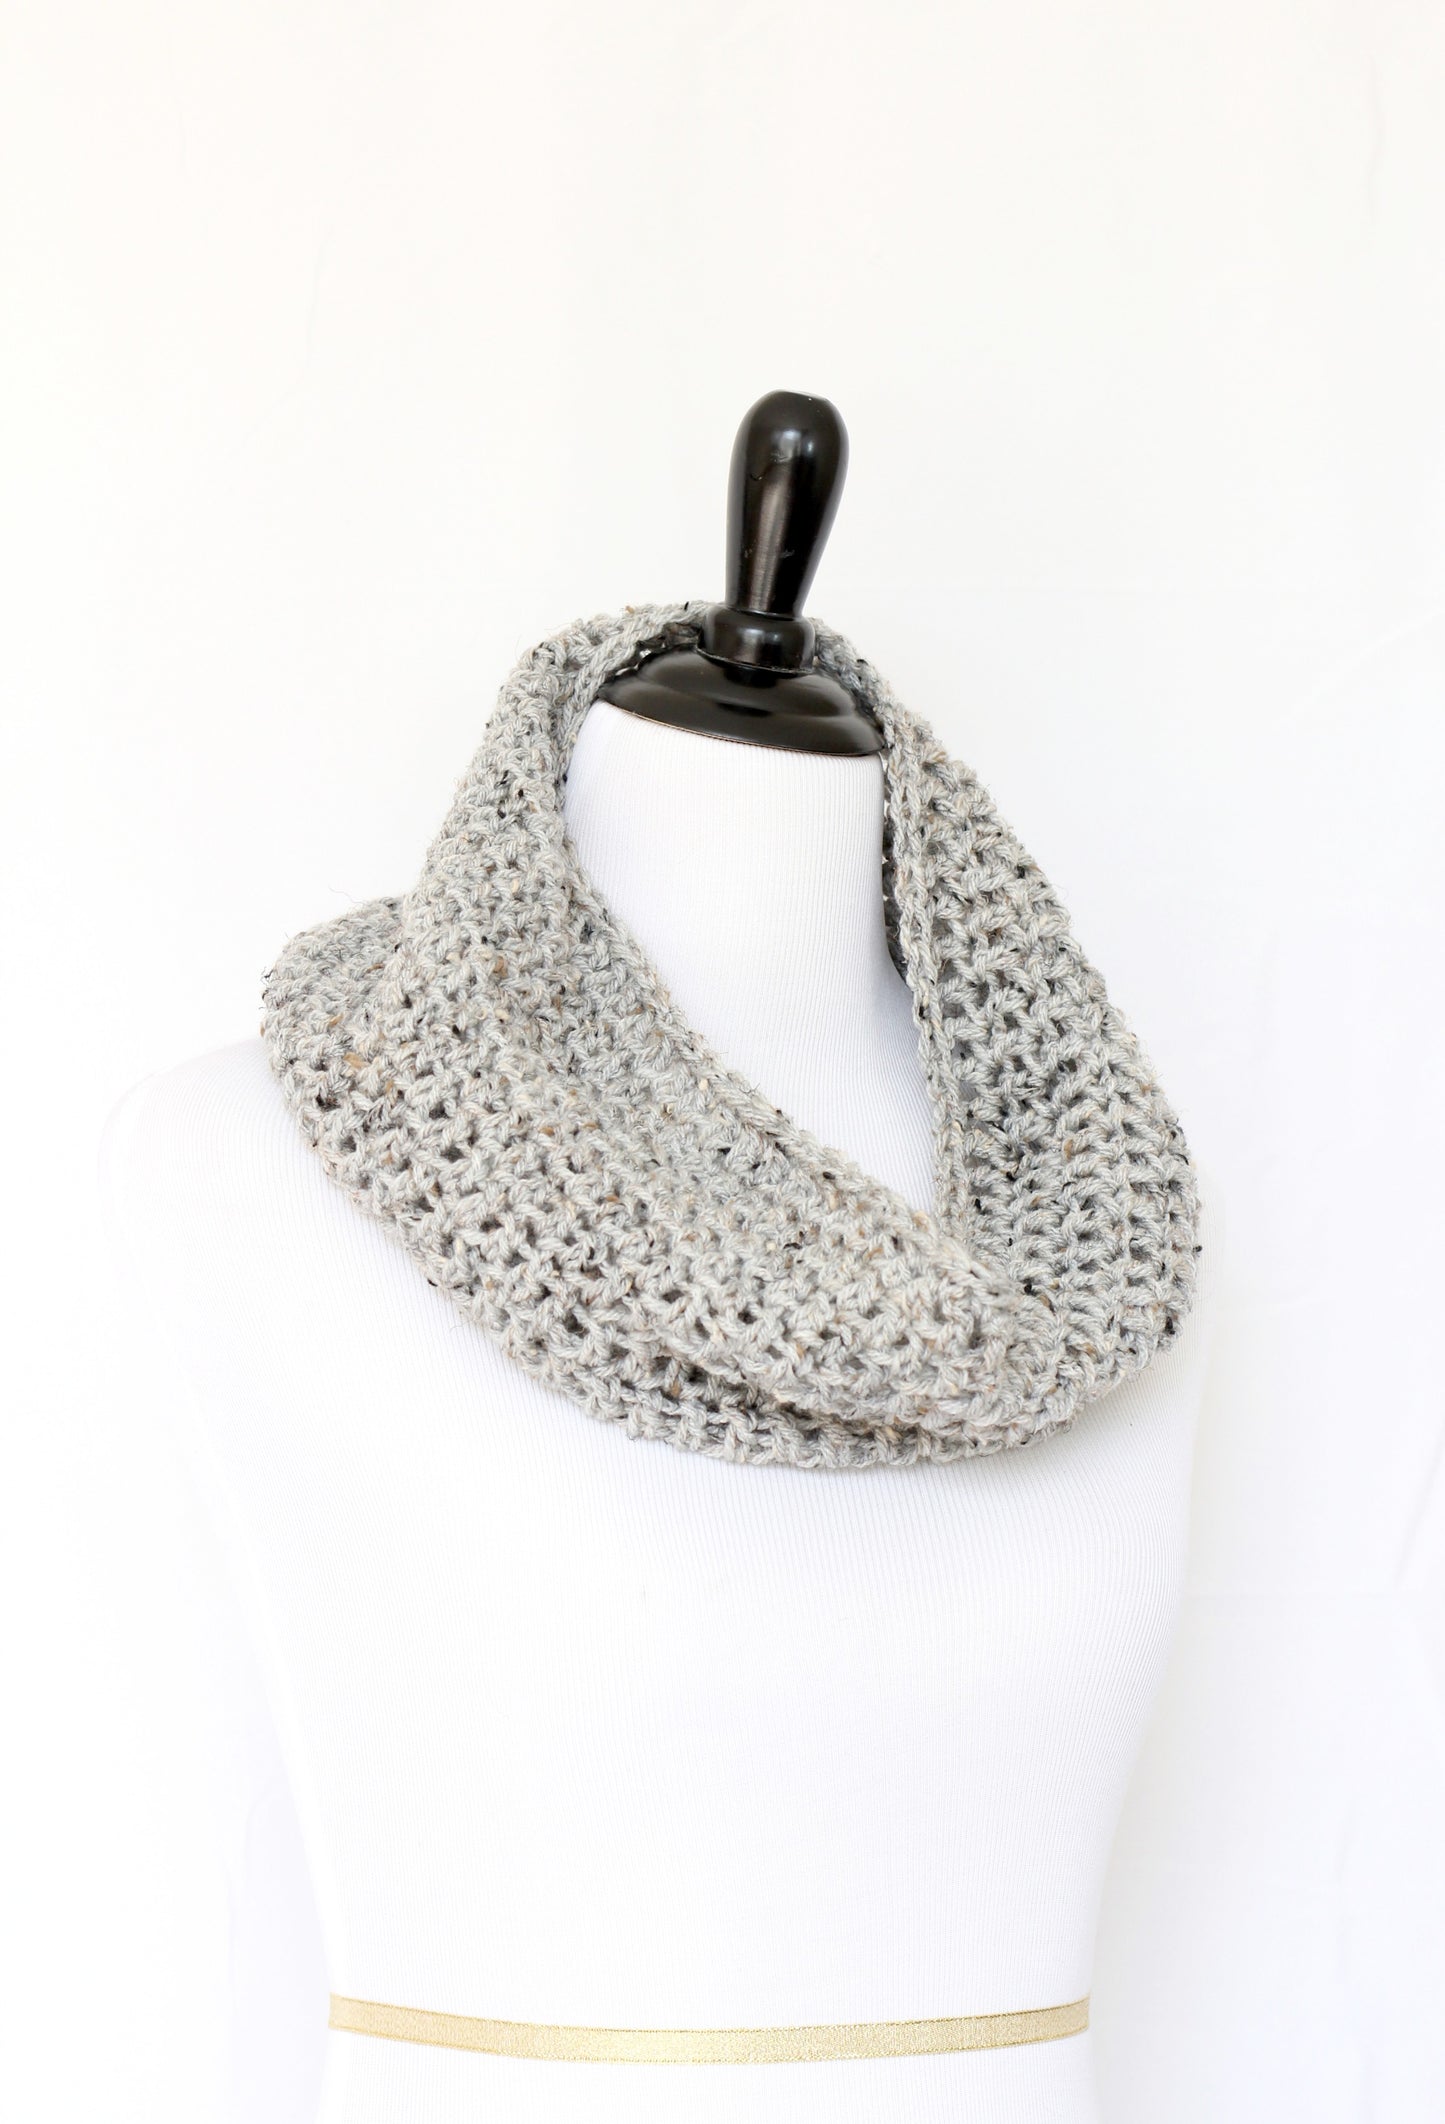 Crochet infinity scarf in grey color, chunky cowl - 12 colors available